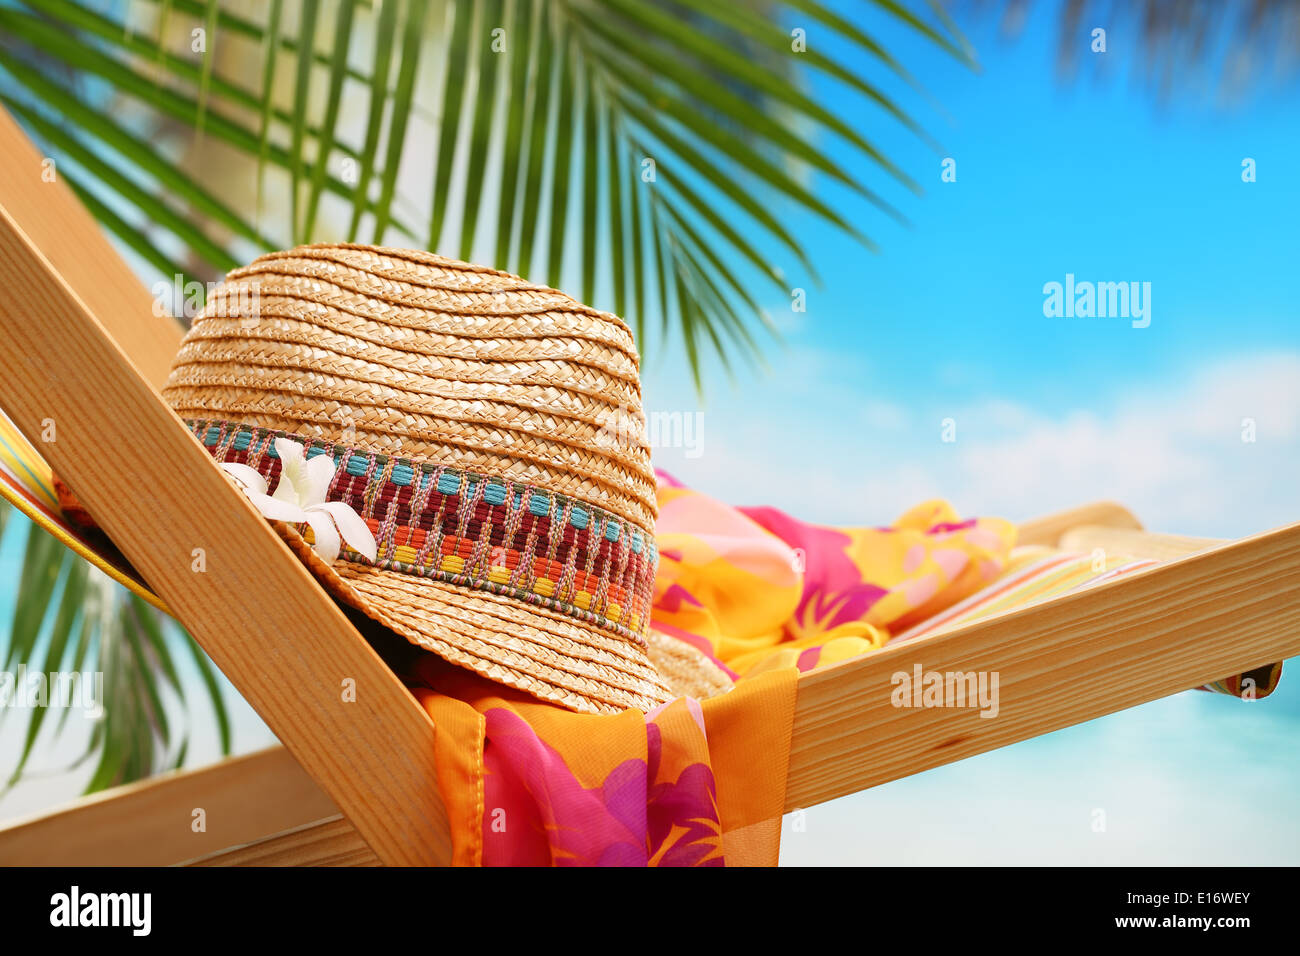 Summer holiday setting with straw hat on beach chair Stock Photo